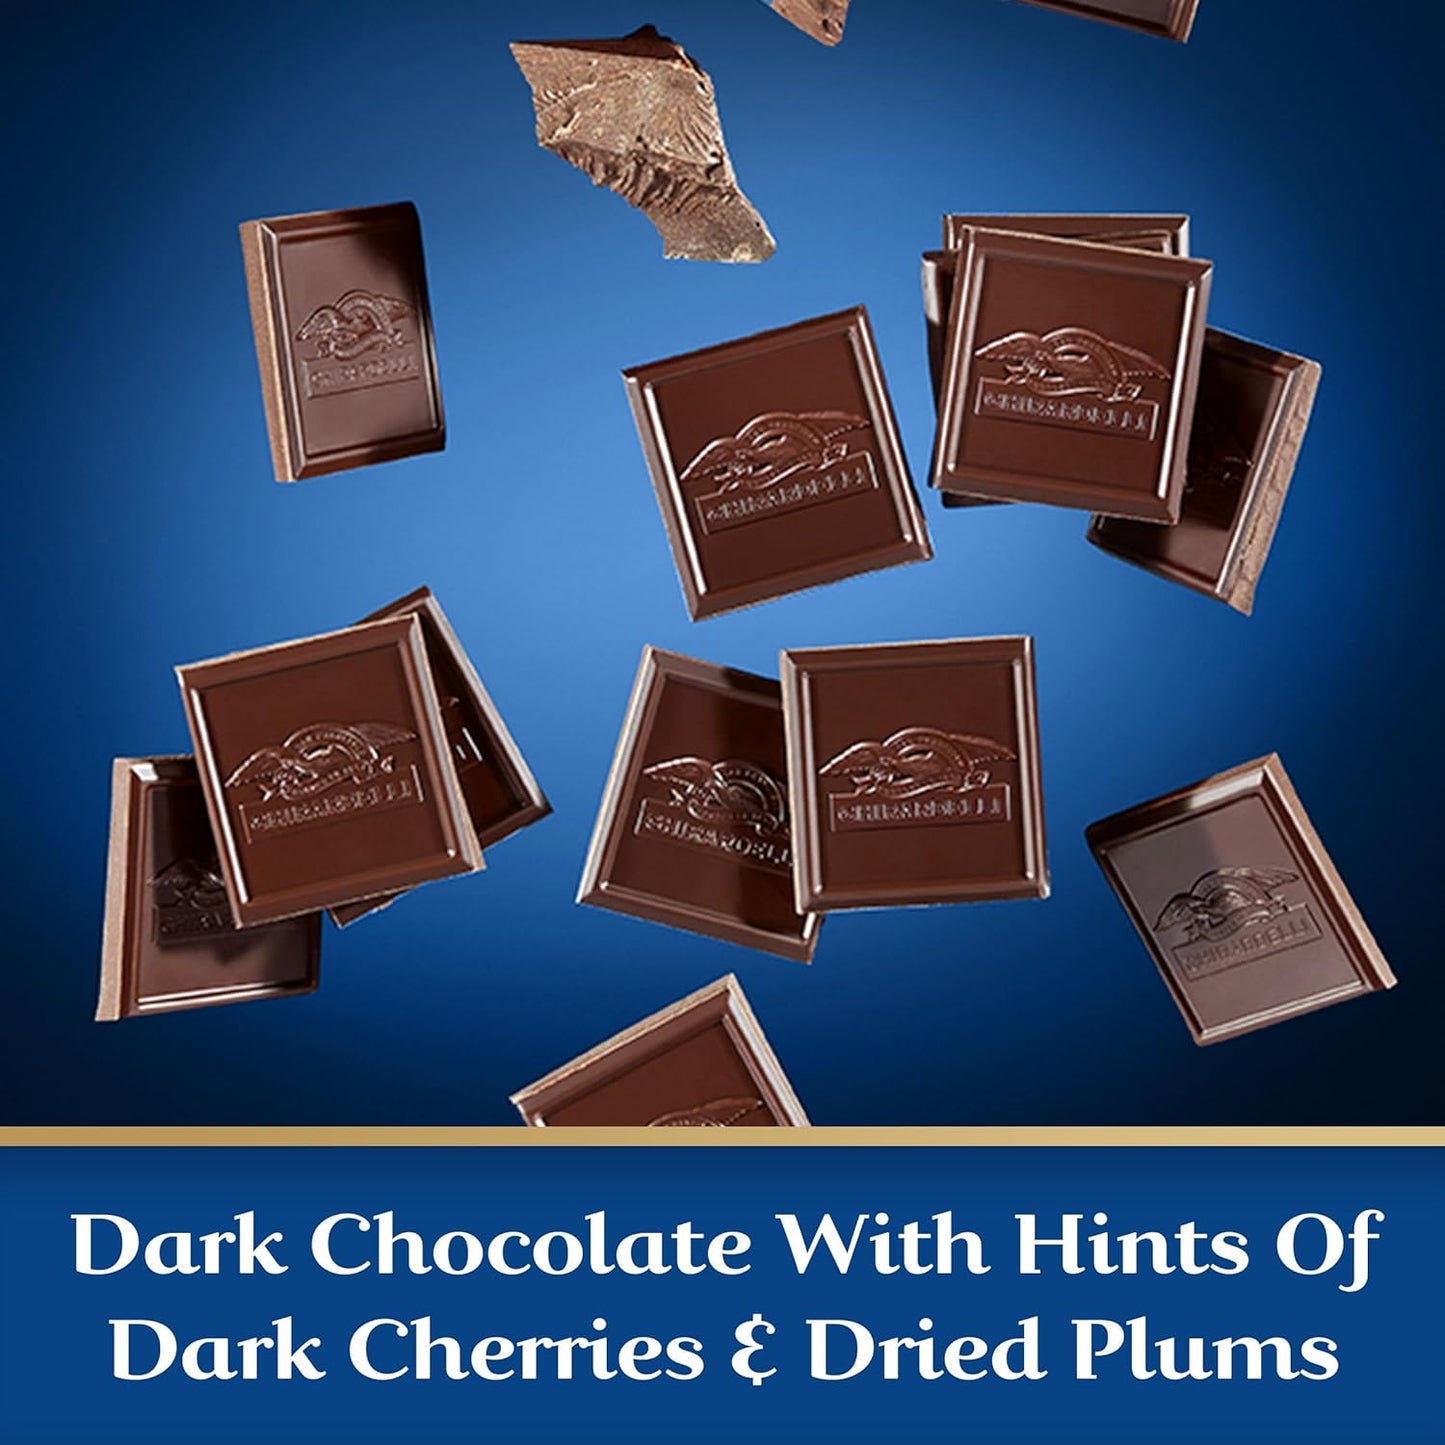 Intense Dark Chocolate Bar, 86% Cacao Holiday Chocolate for Holiday Gifts and Stocking Stuffers, 3.17 Oz